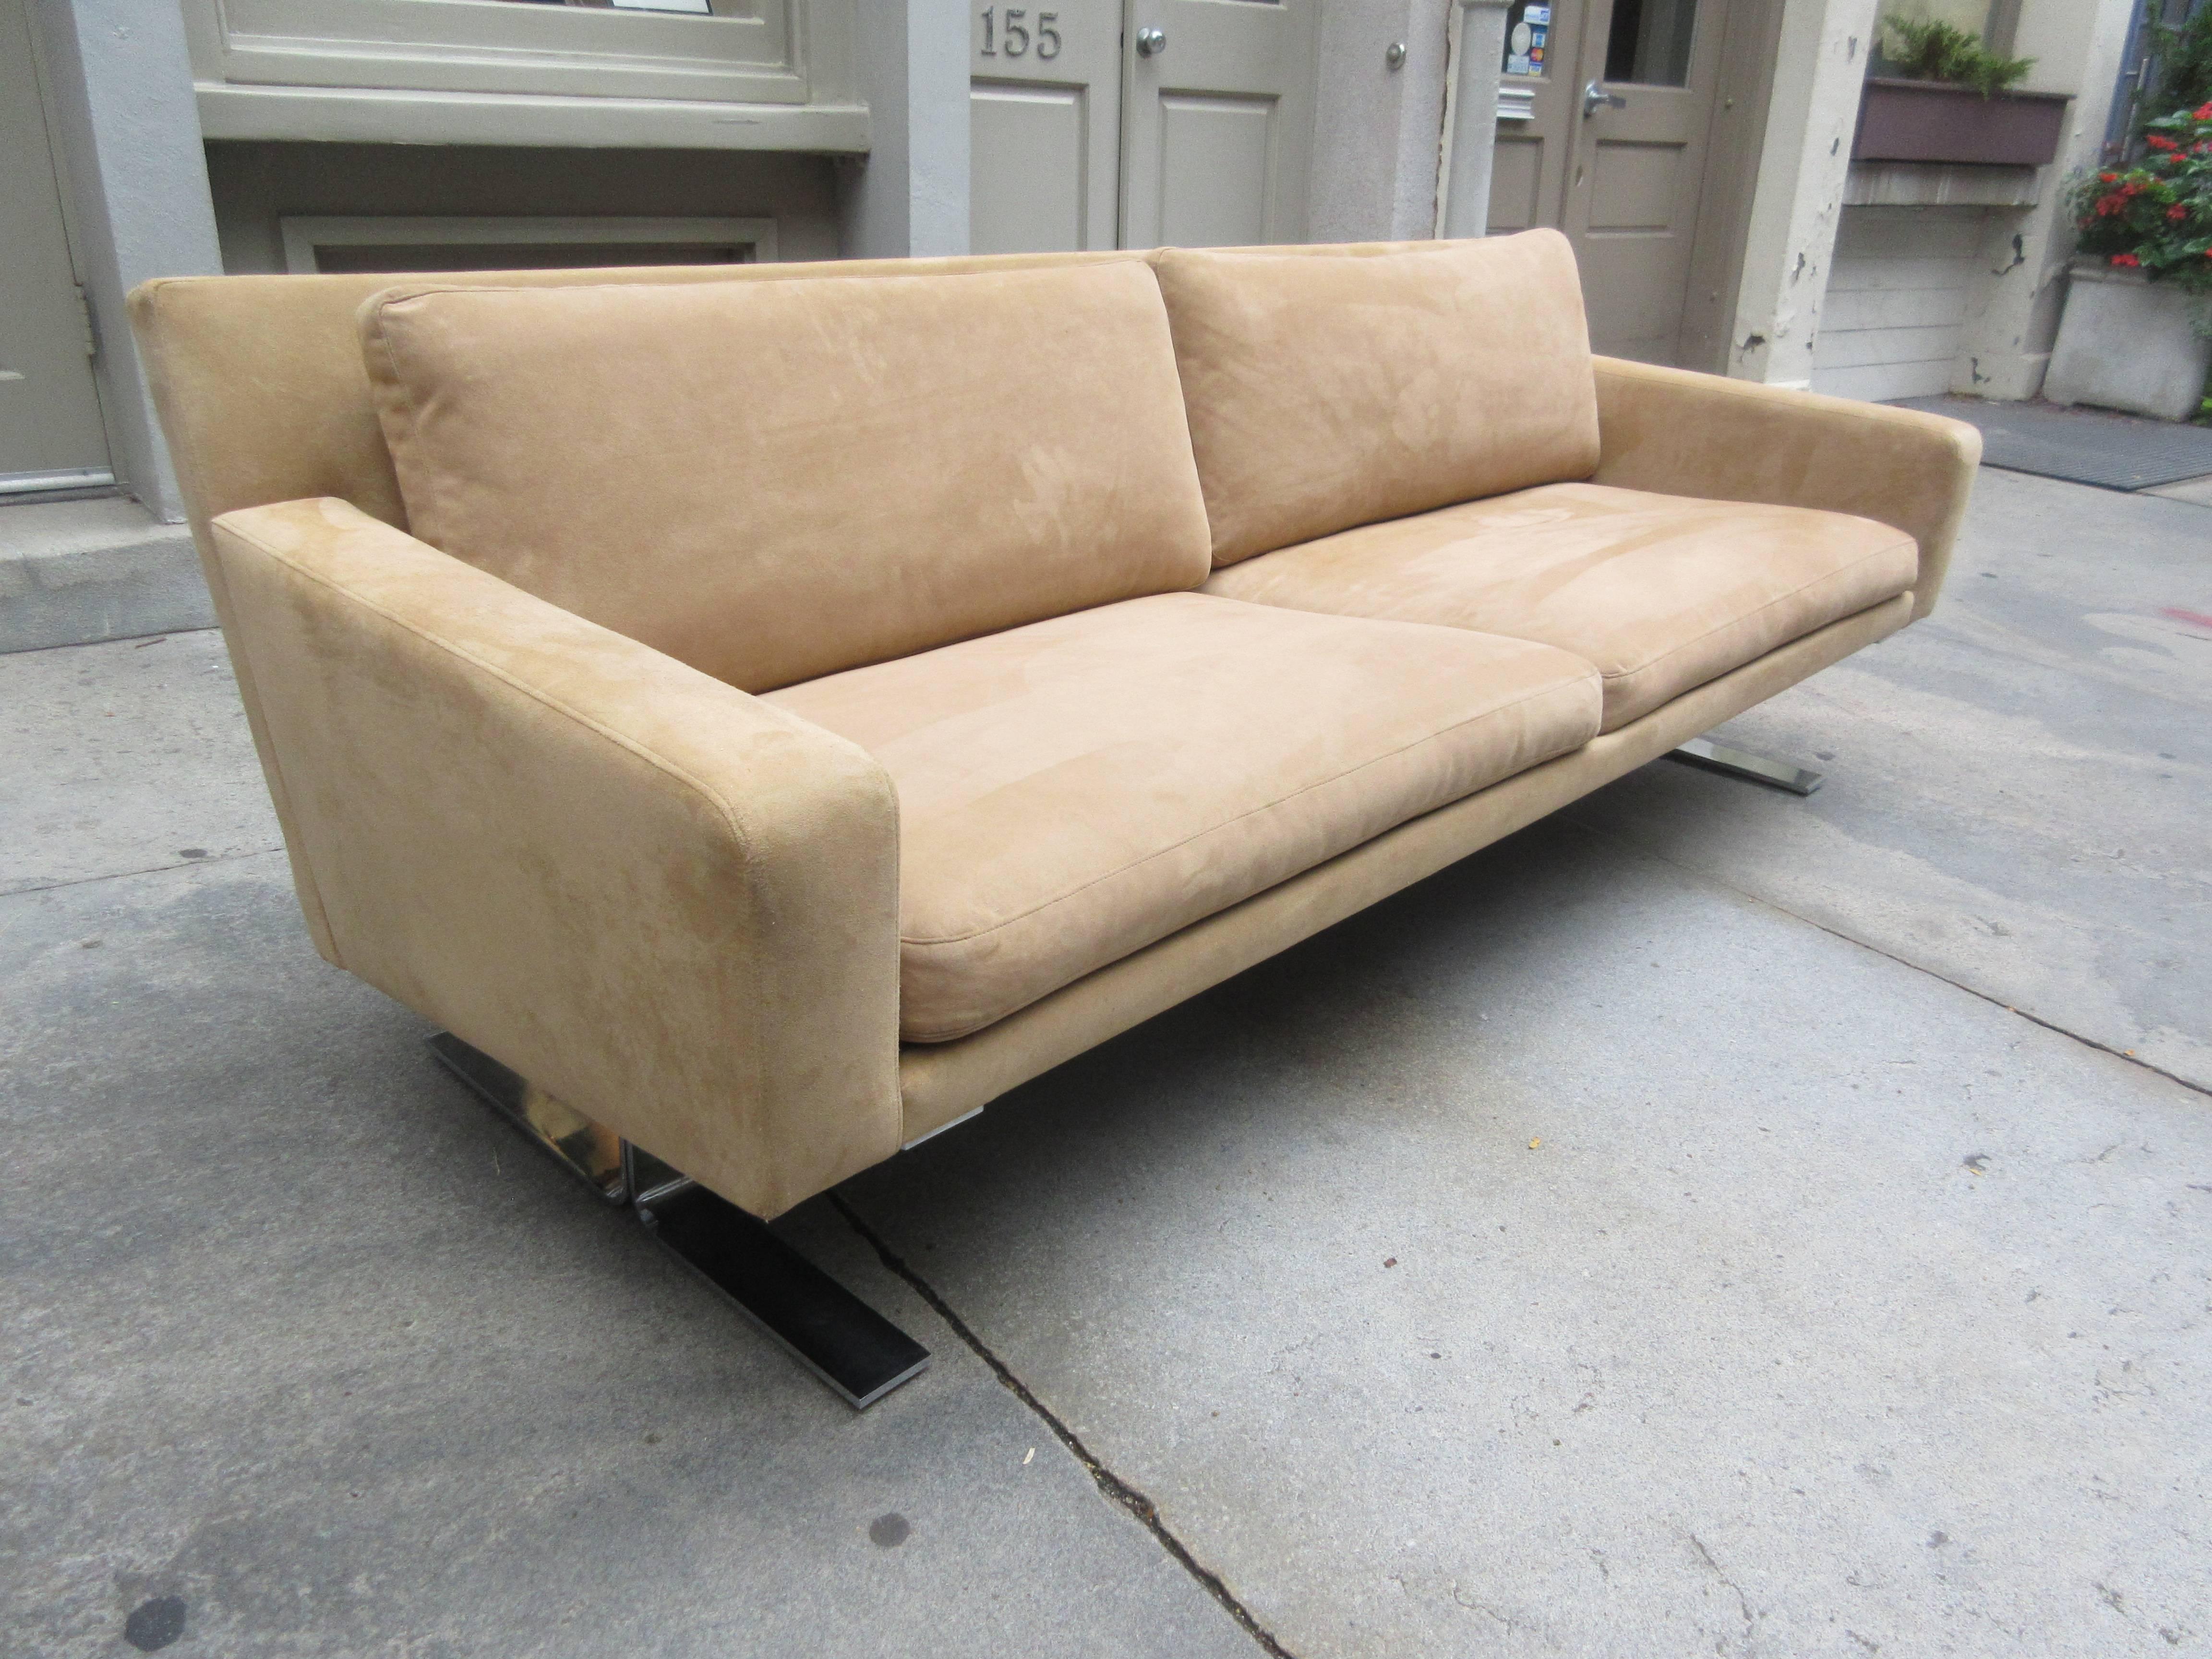 Nice scale Danish sofa by Erik Ole Jorgensen for DUX Furniture. Two large flat-band Chromed Metal Sled type Feet suspend this low slung sofa. Covered 15 years ago in a tan ultrasuede fabric. Still presents very well but fabric is not perfect. One